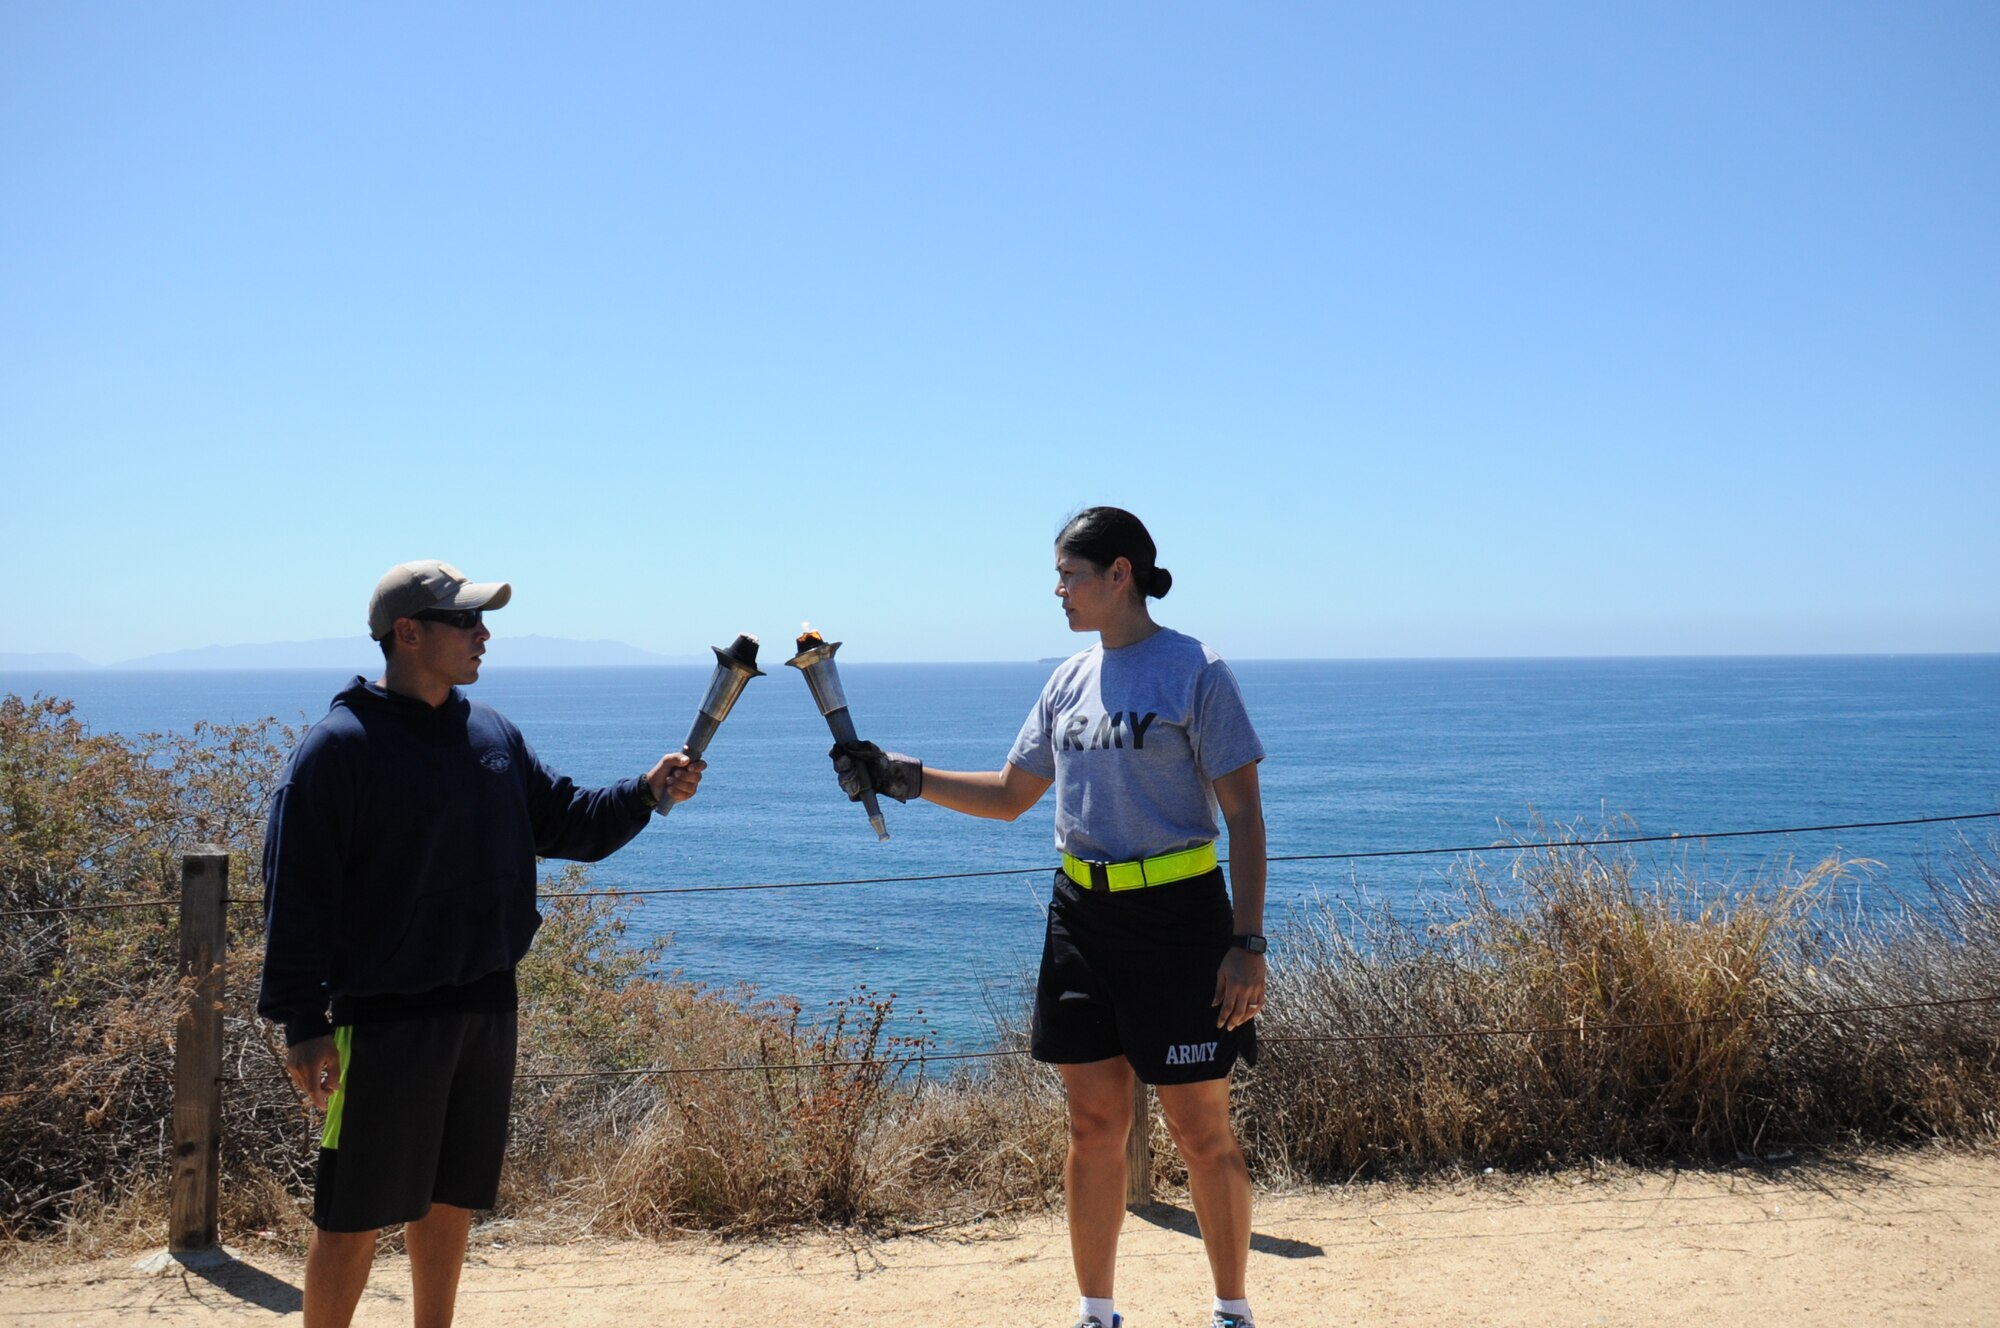 With Catalina Island in the background, a U.S. Coast Guardsman hands off the POW/MIA torch to a U.S. Army soldier on the Palos Verde peninsula during the 24-hour relay in remembrance to honor those who were held captive – and those still missing and unaccounted for during times of armed conflict. (U.S. Air Force photo/Van Ha)